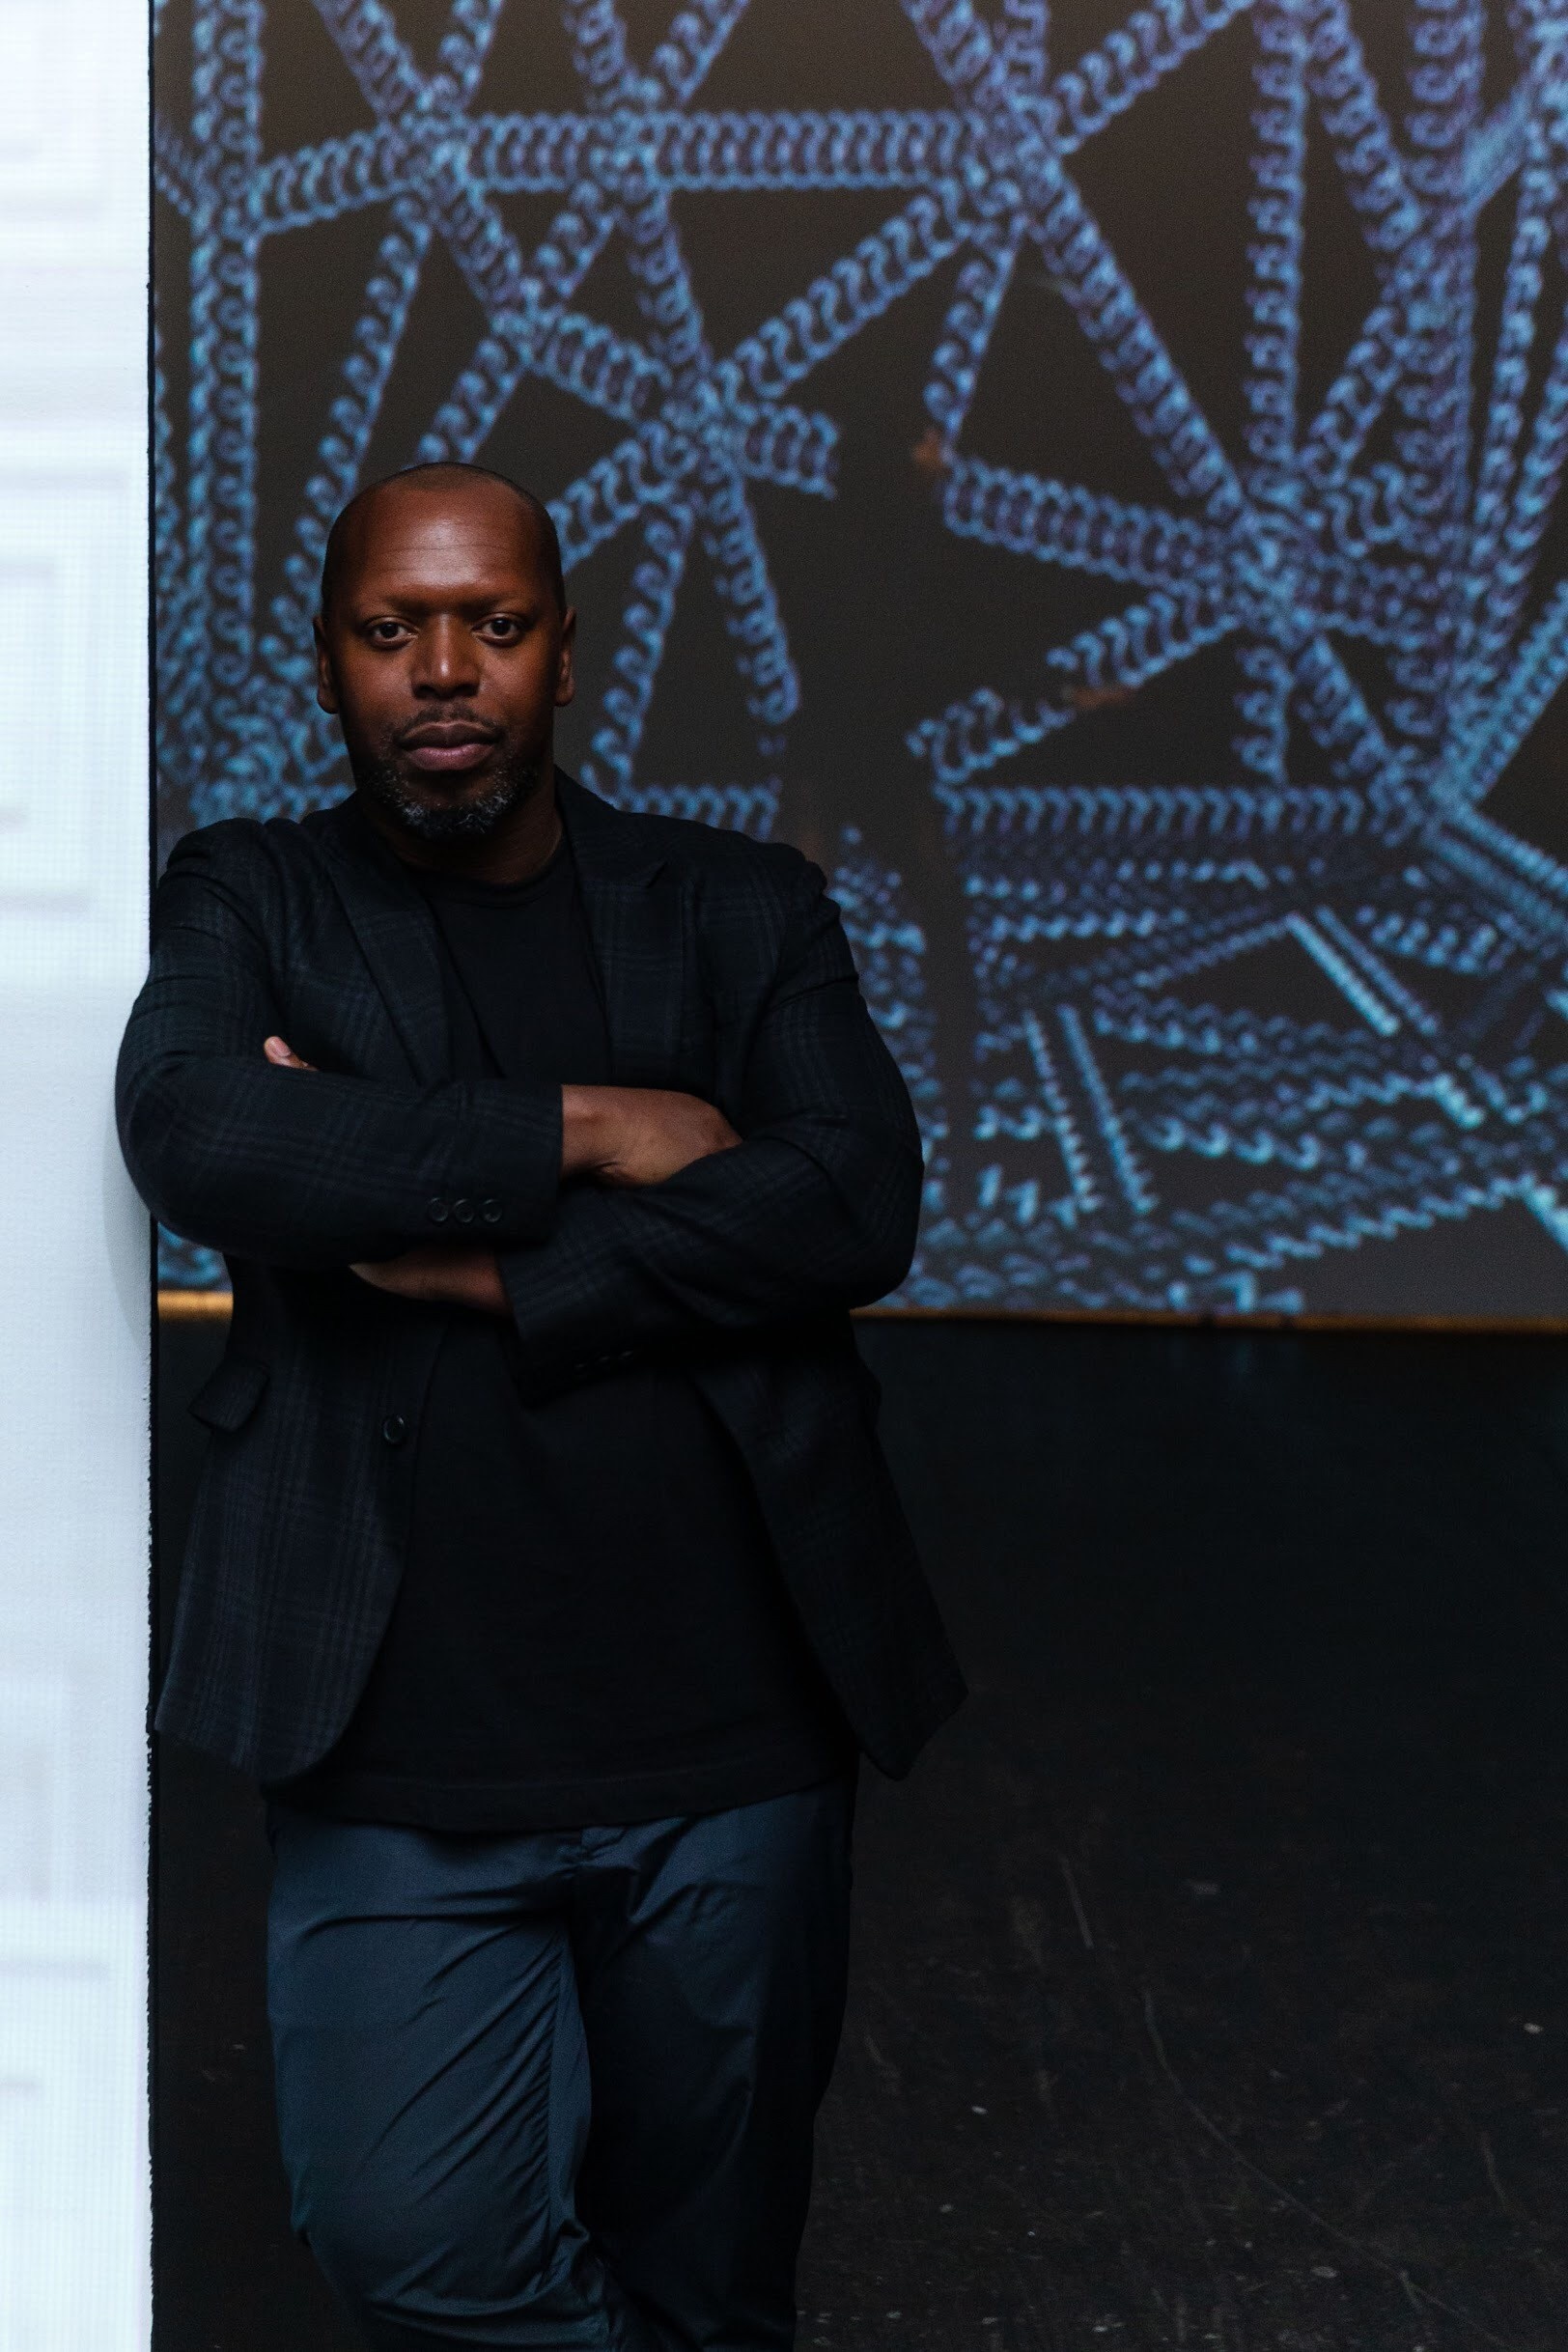 An portrait of the artist Rashaad Newsome standing in front of a digital projection with his arms crossed across his chest